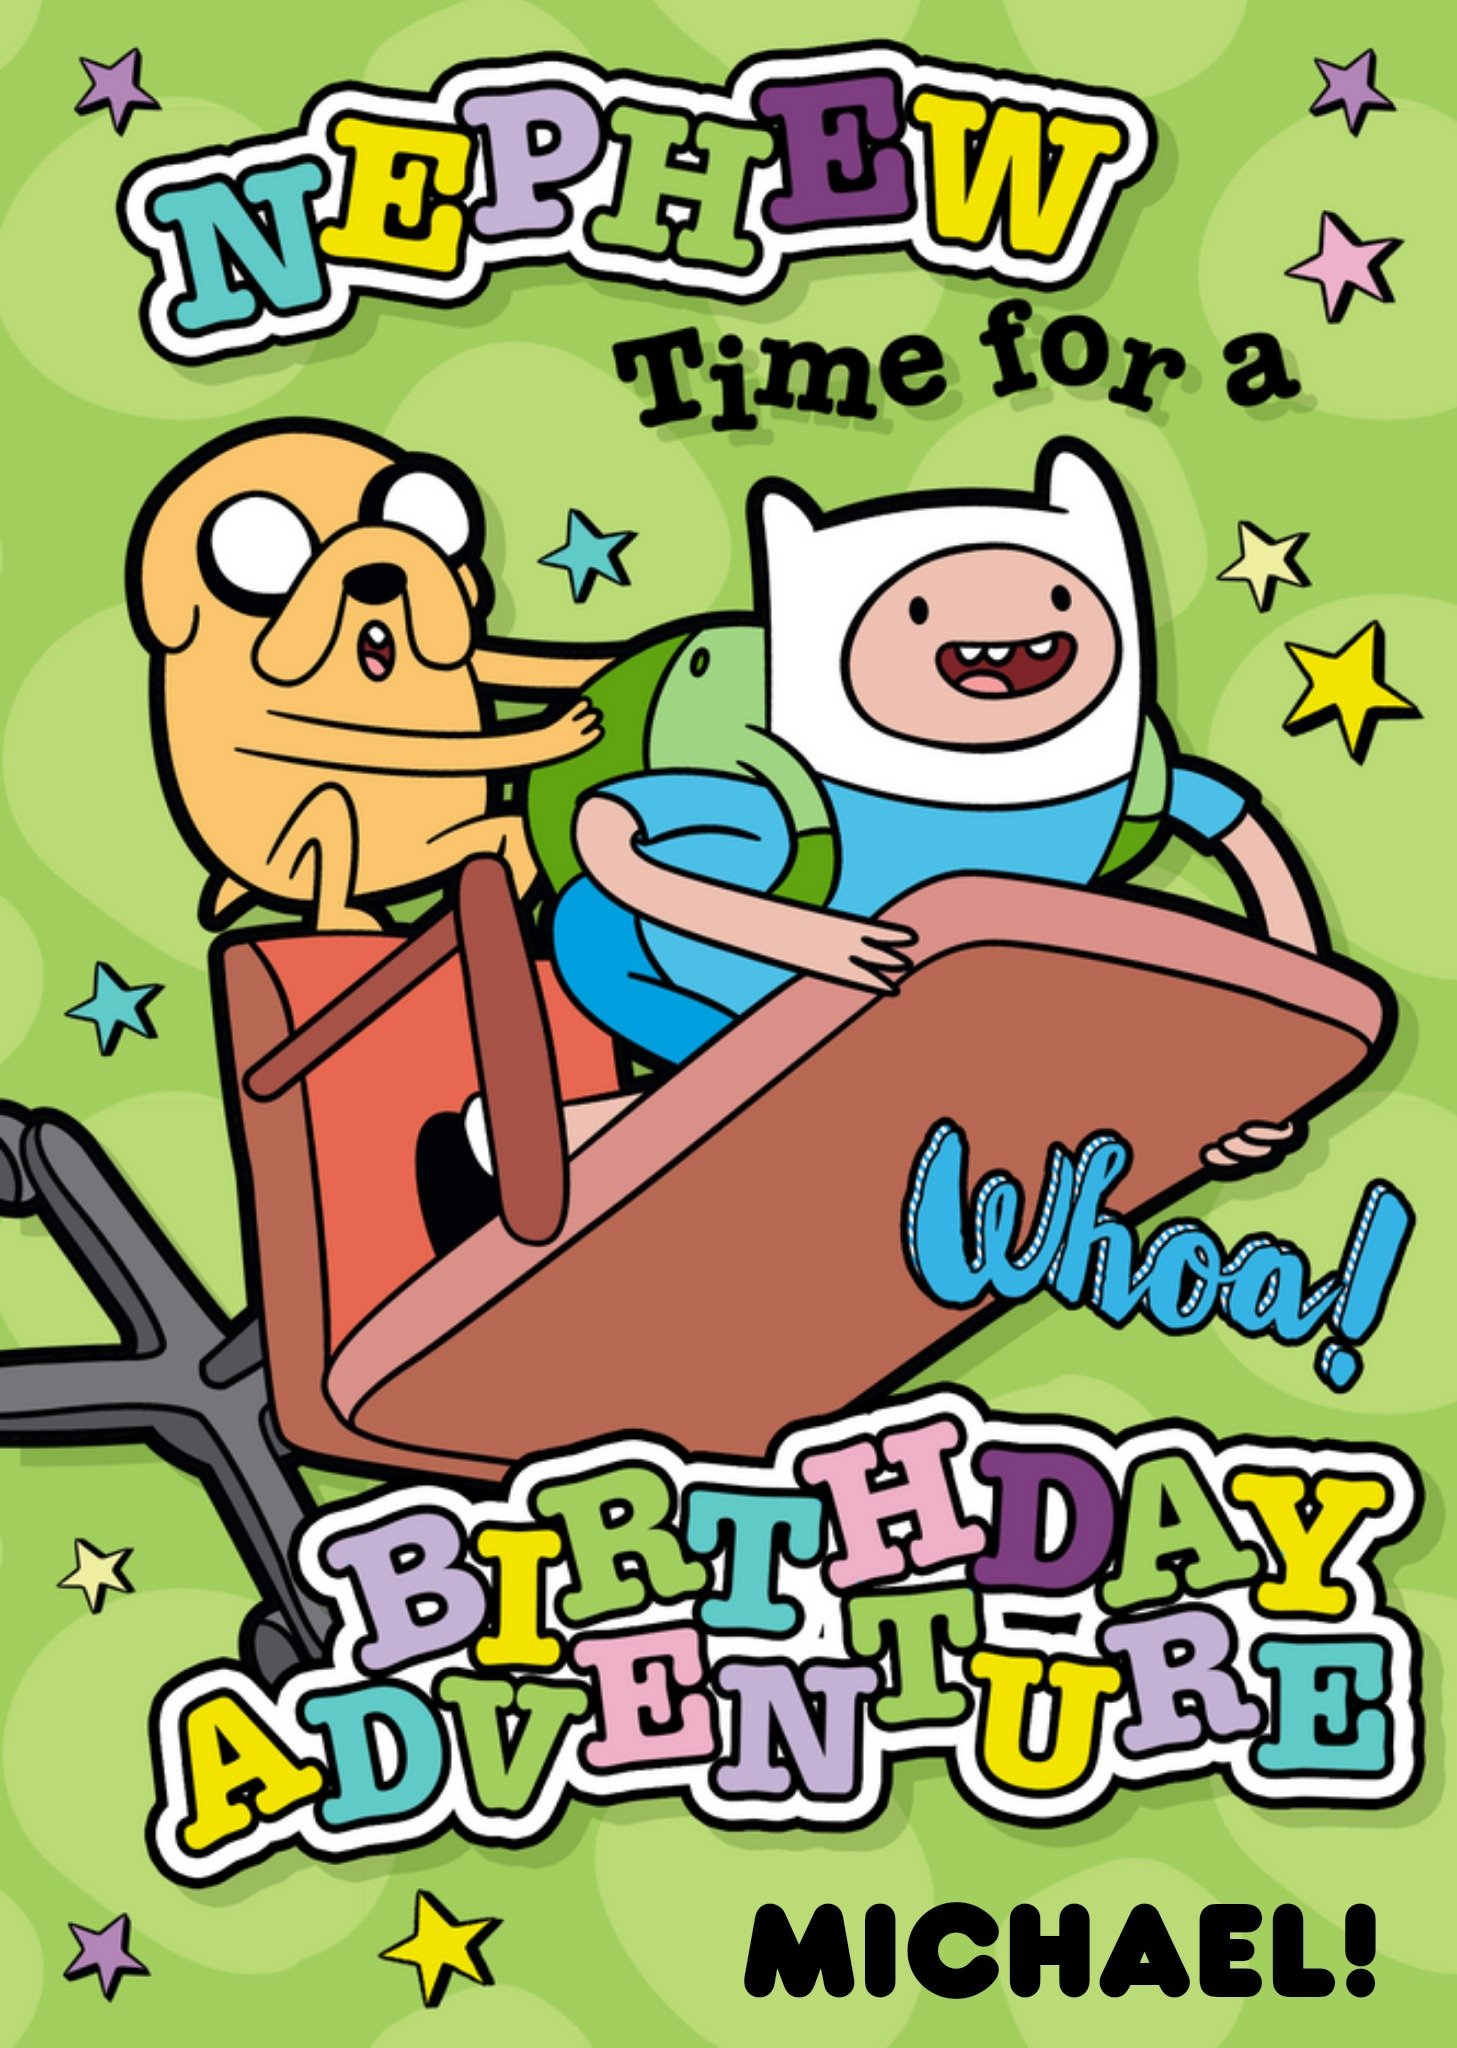 Moonpig Adventure Time Nephew Time For A Birthday Adventure Peronalised Card, Large